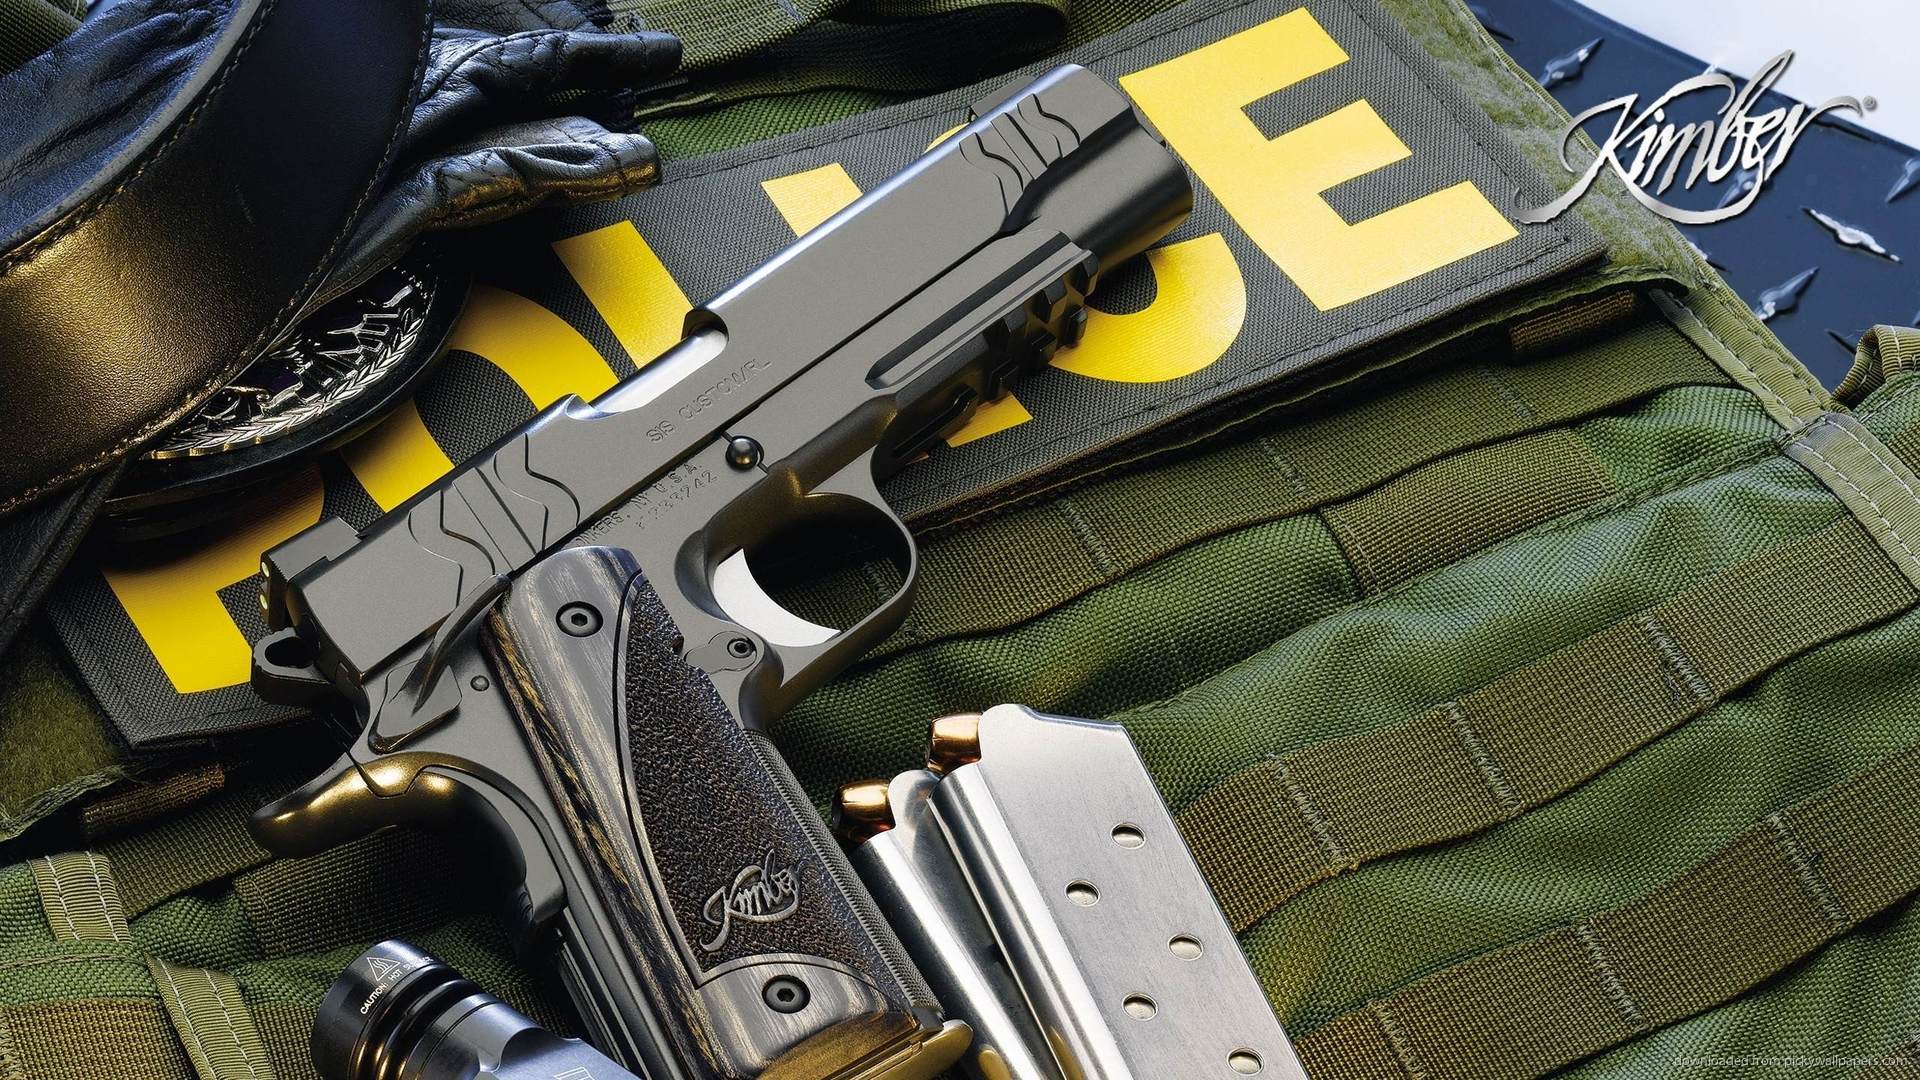 Colt 1911 Police Wallpaper For iPad 2 1920x1080